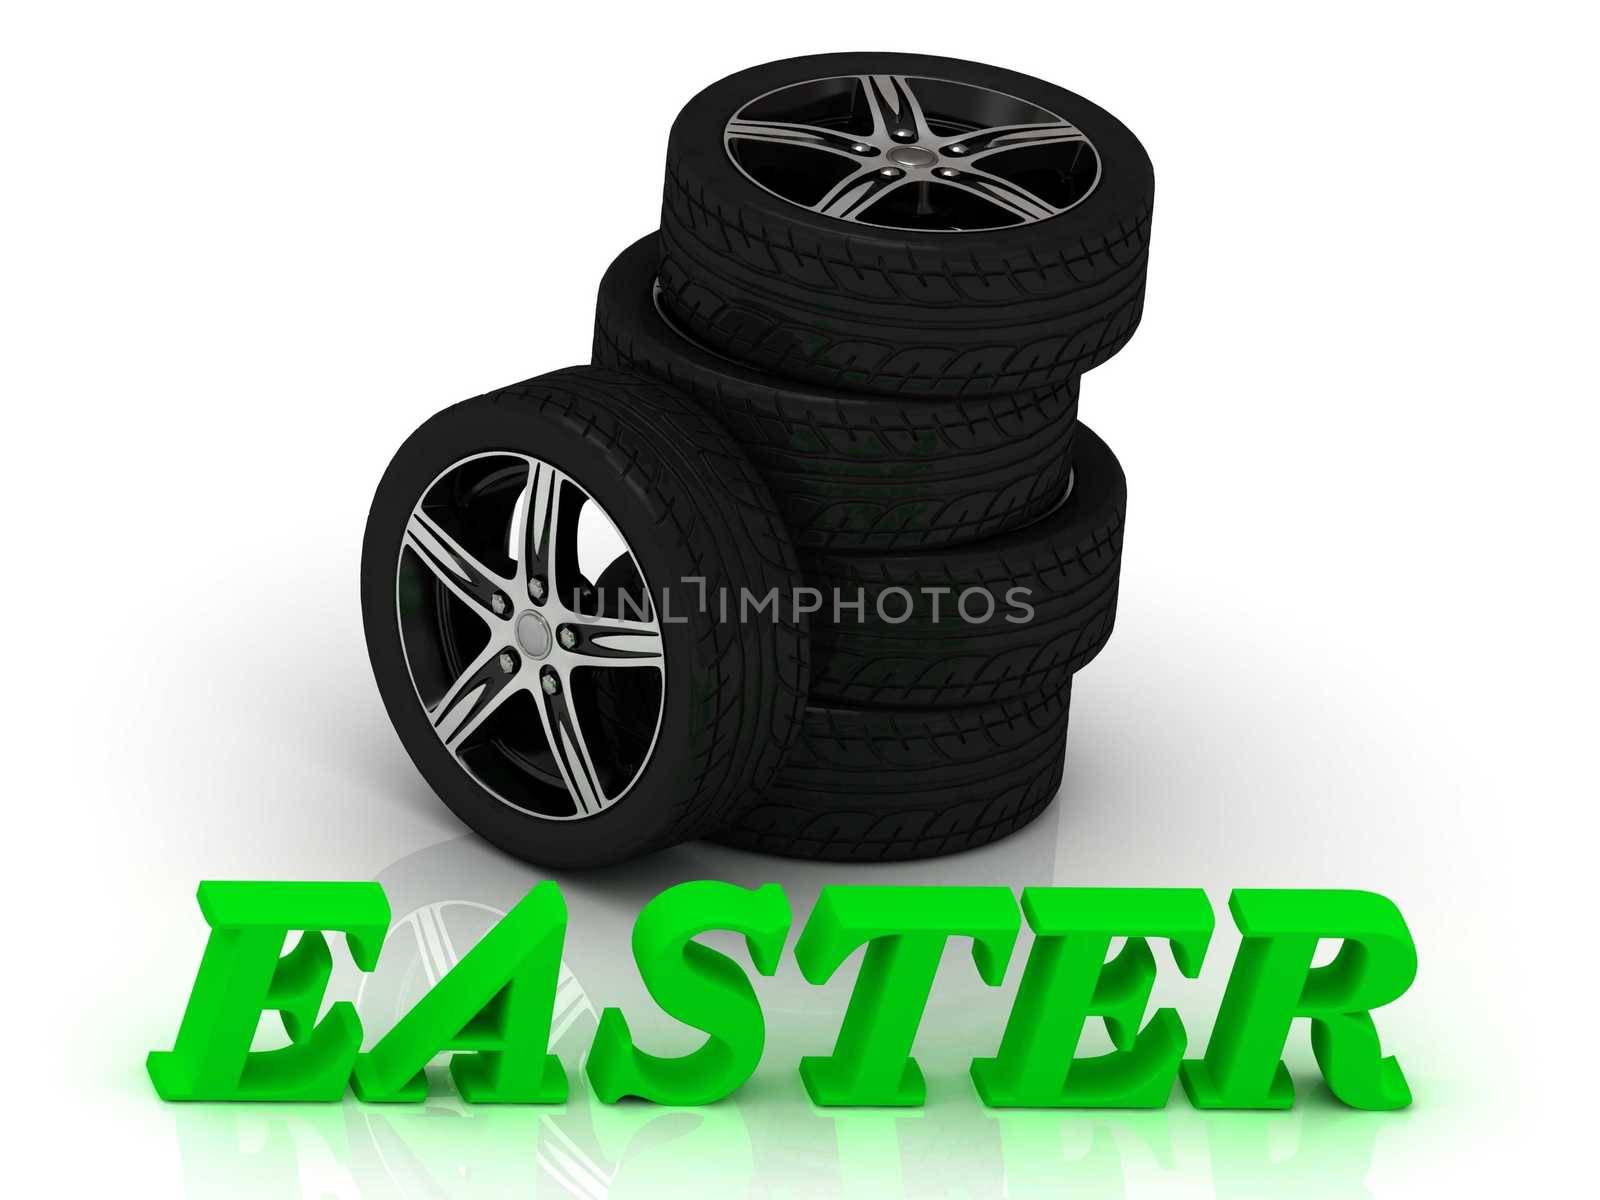 EASTER- bright letters and rims mashine black wheels on a white background